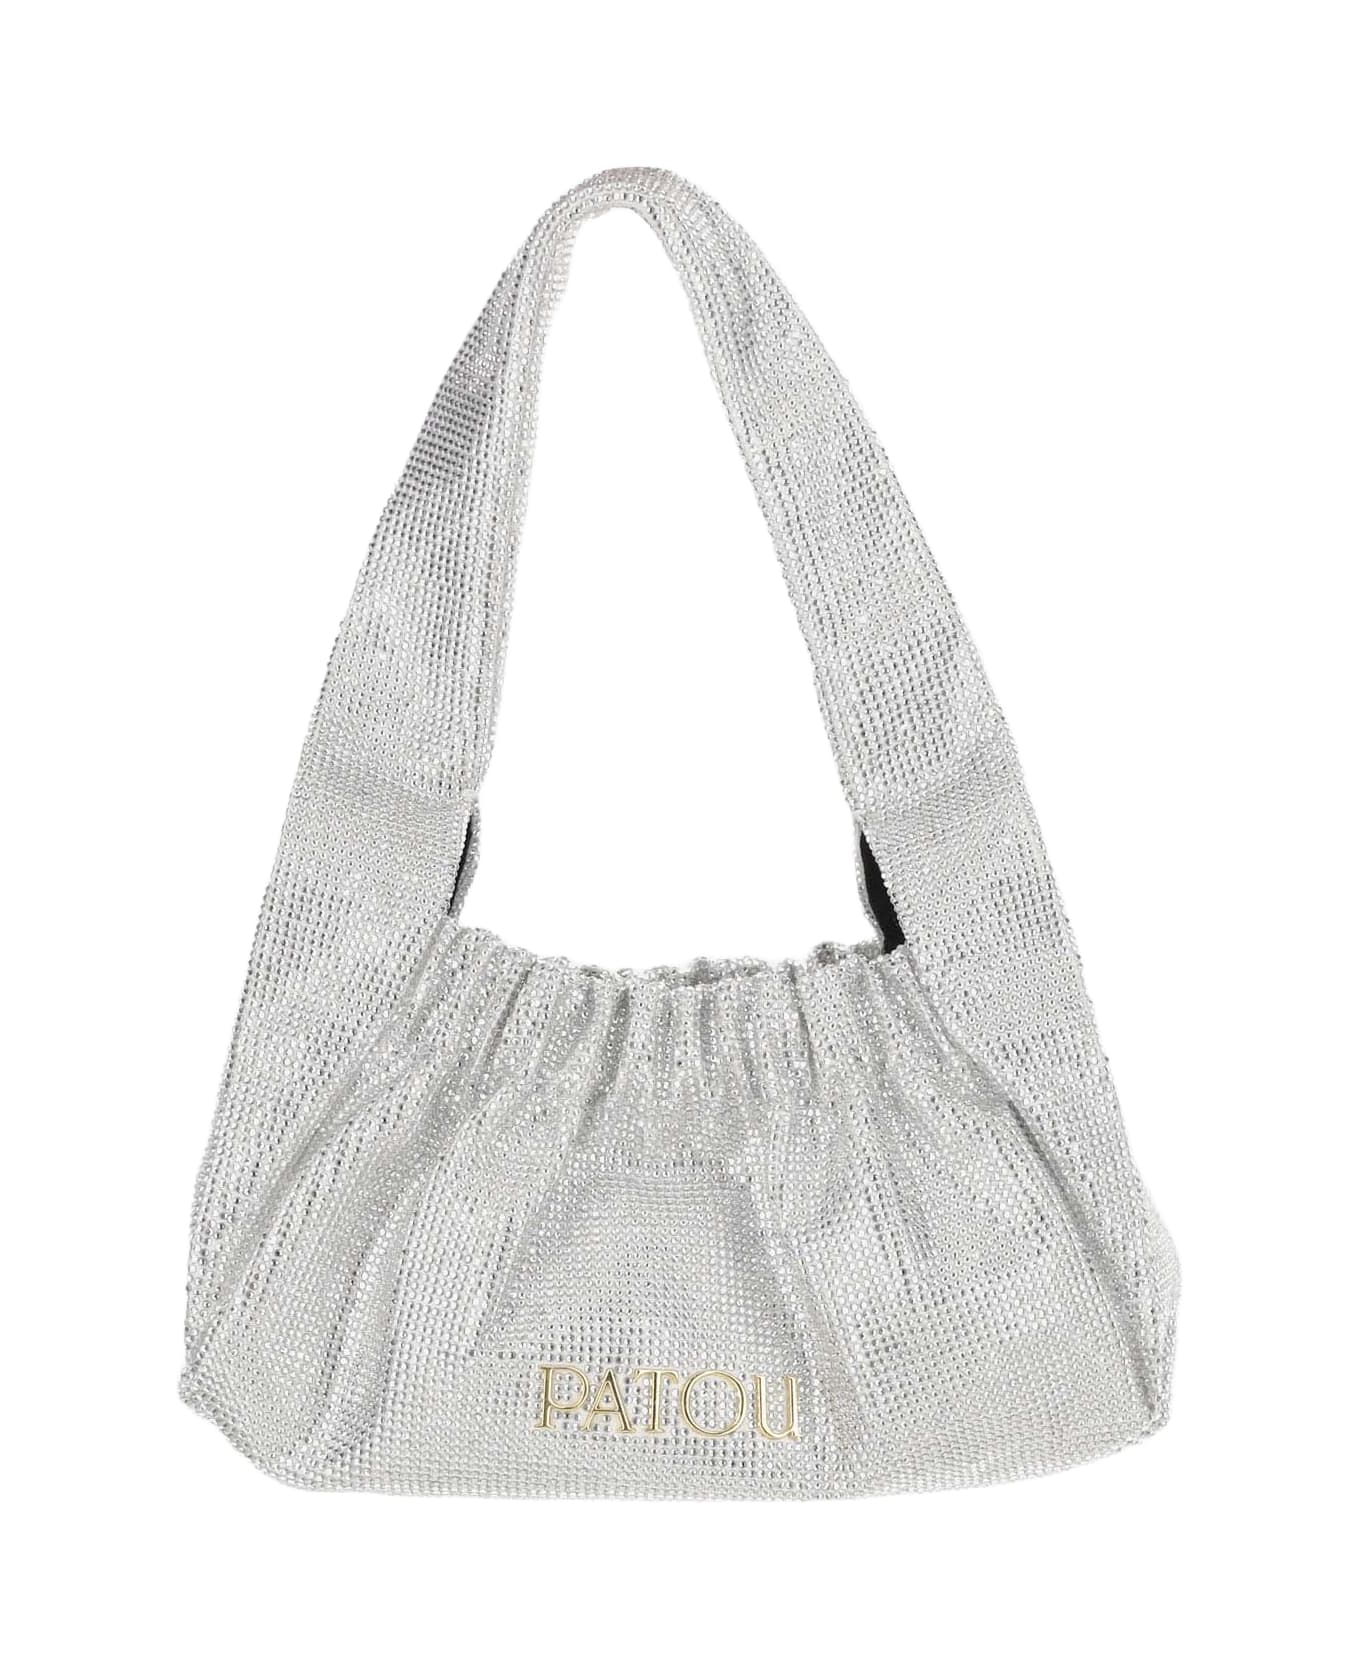 Patou Le Biscuit Satin And Rhinestone Bag - White